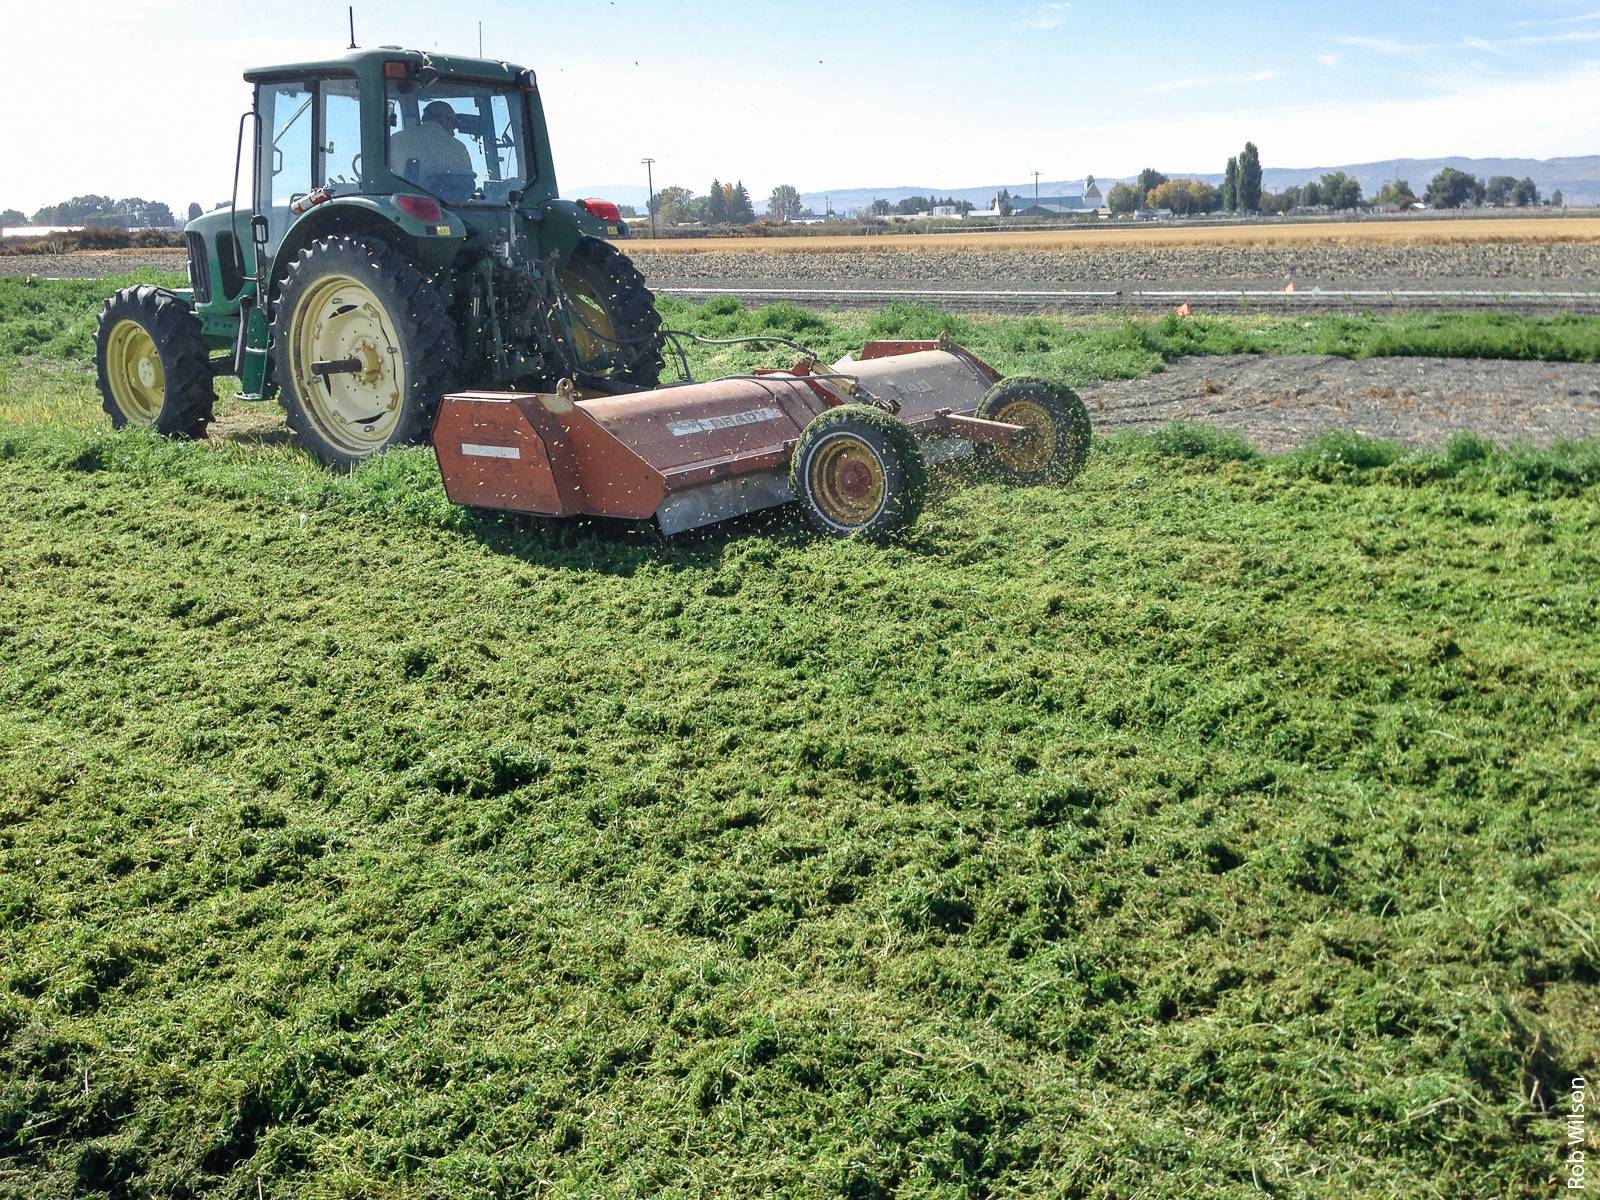 To make the organic nitrogen in the cover crop available to the next crop planted in the field, the cover crop is chopped, above, and then tilled into the soil, where the nitrogen is mineralized by microbes.